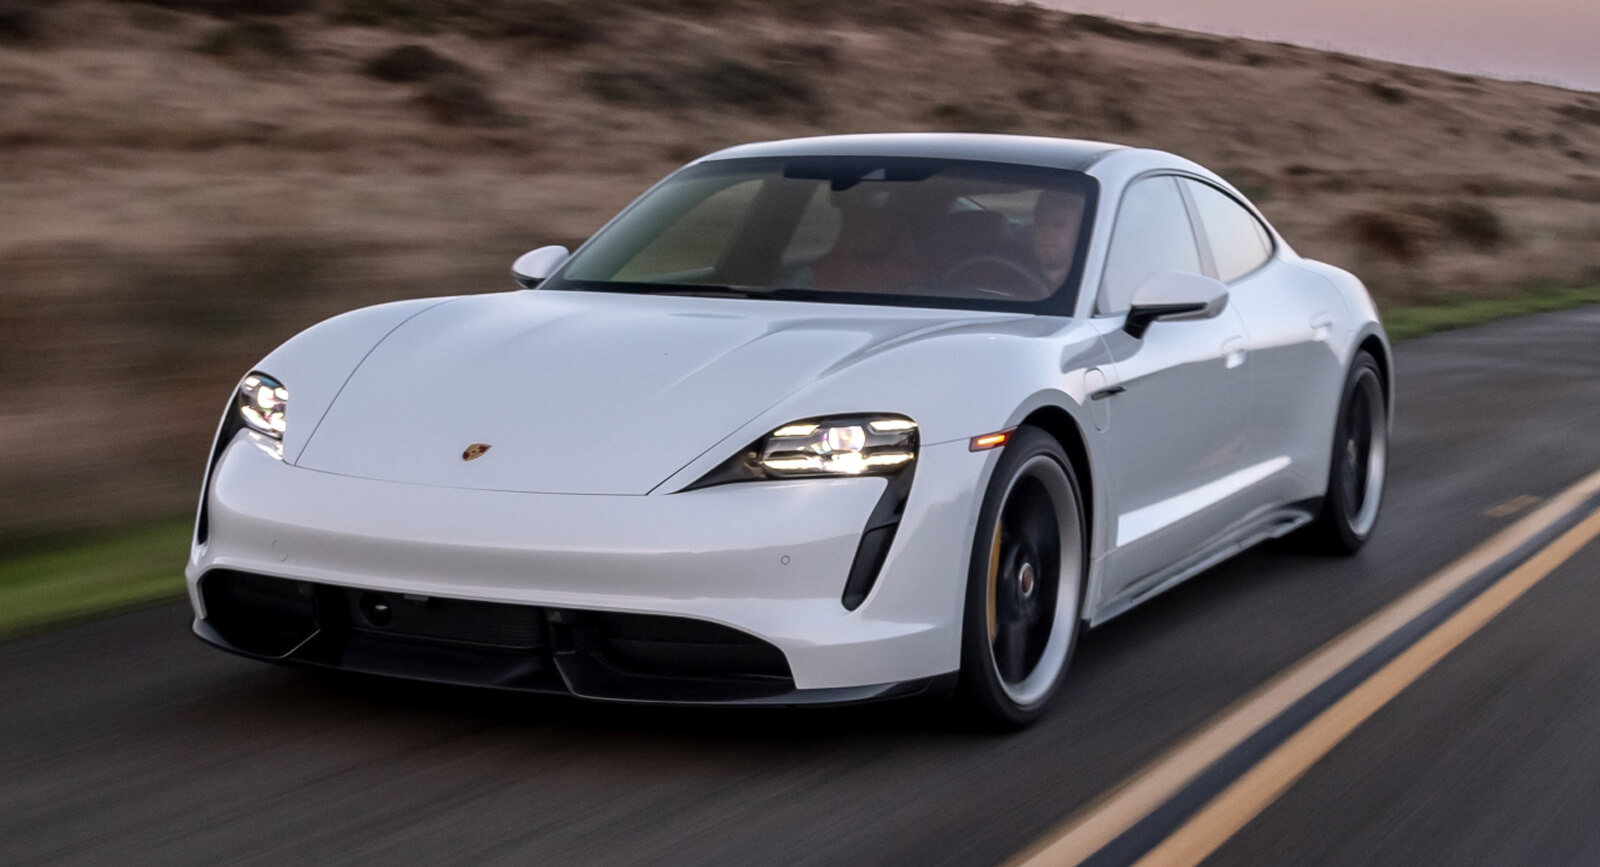 2020 Porsche Taycan Gets Free Software Update, But It Requires Visiting The Dealer